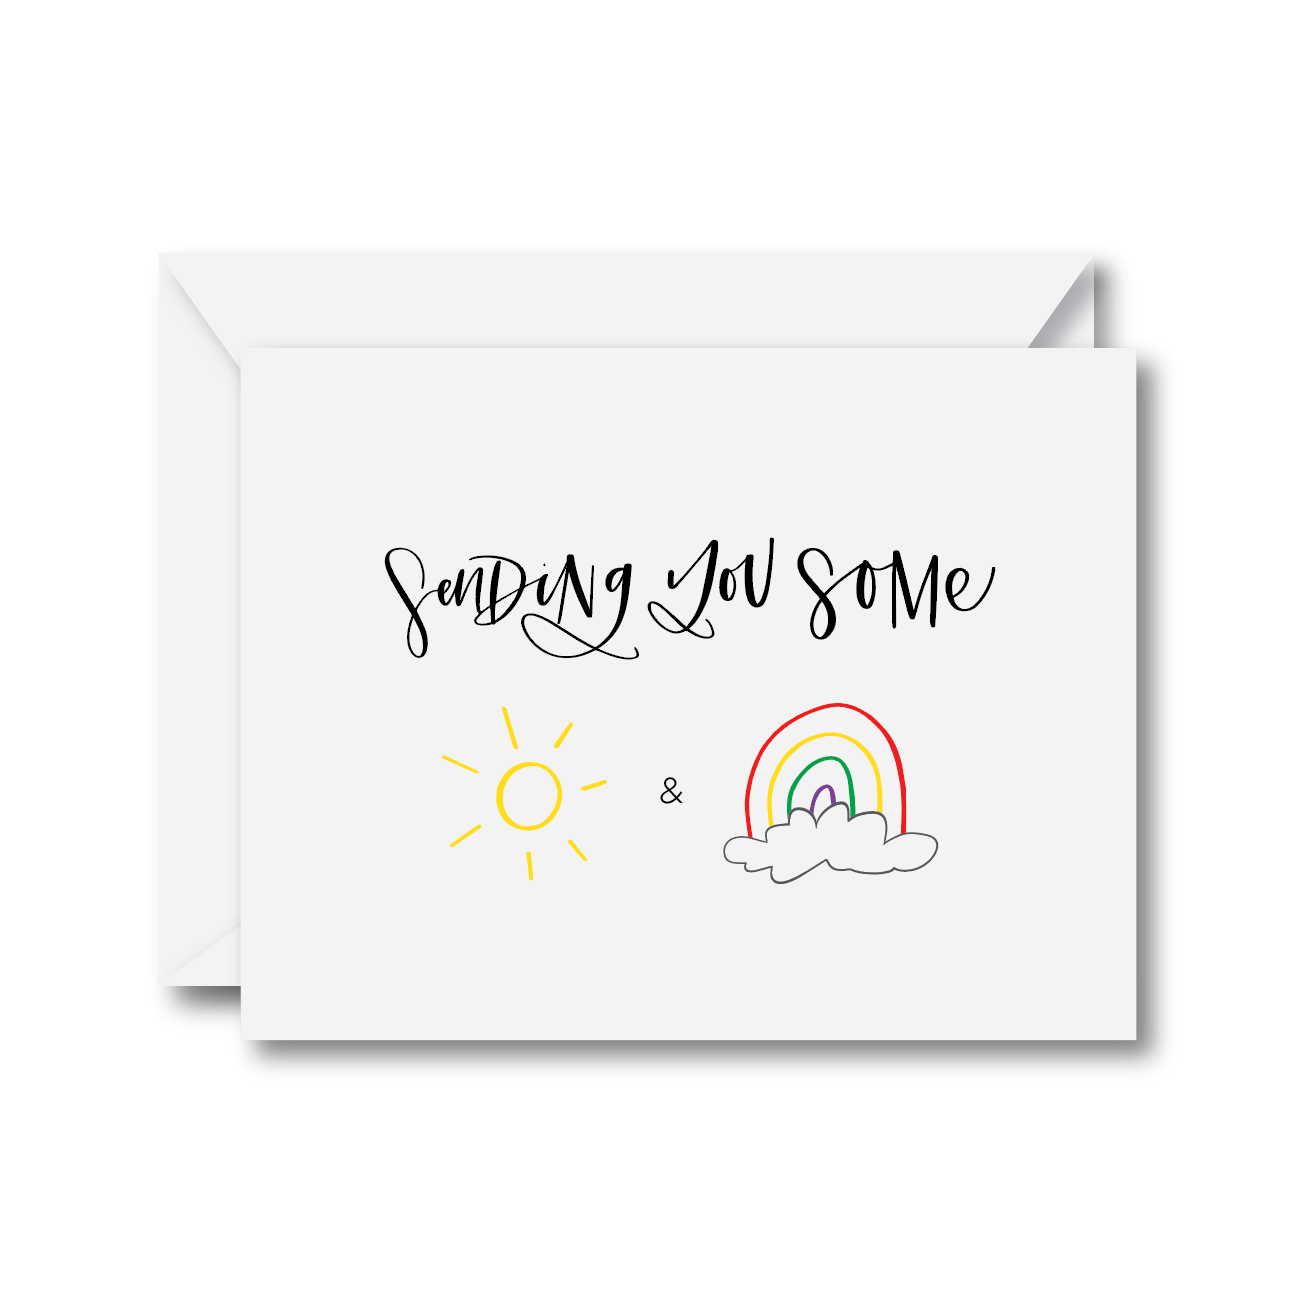 Sending you Some Sunshine and Rainbows Card